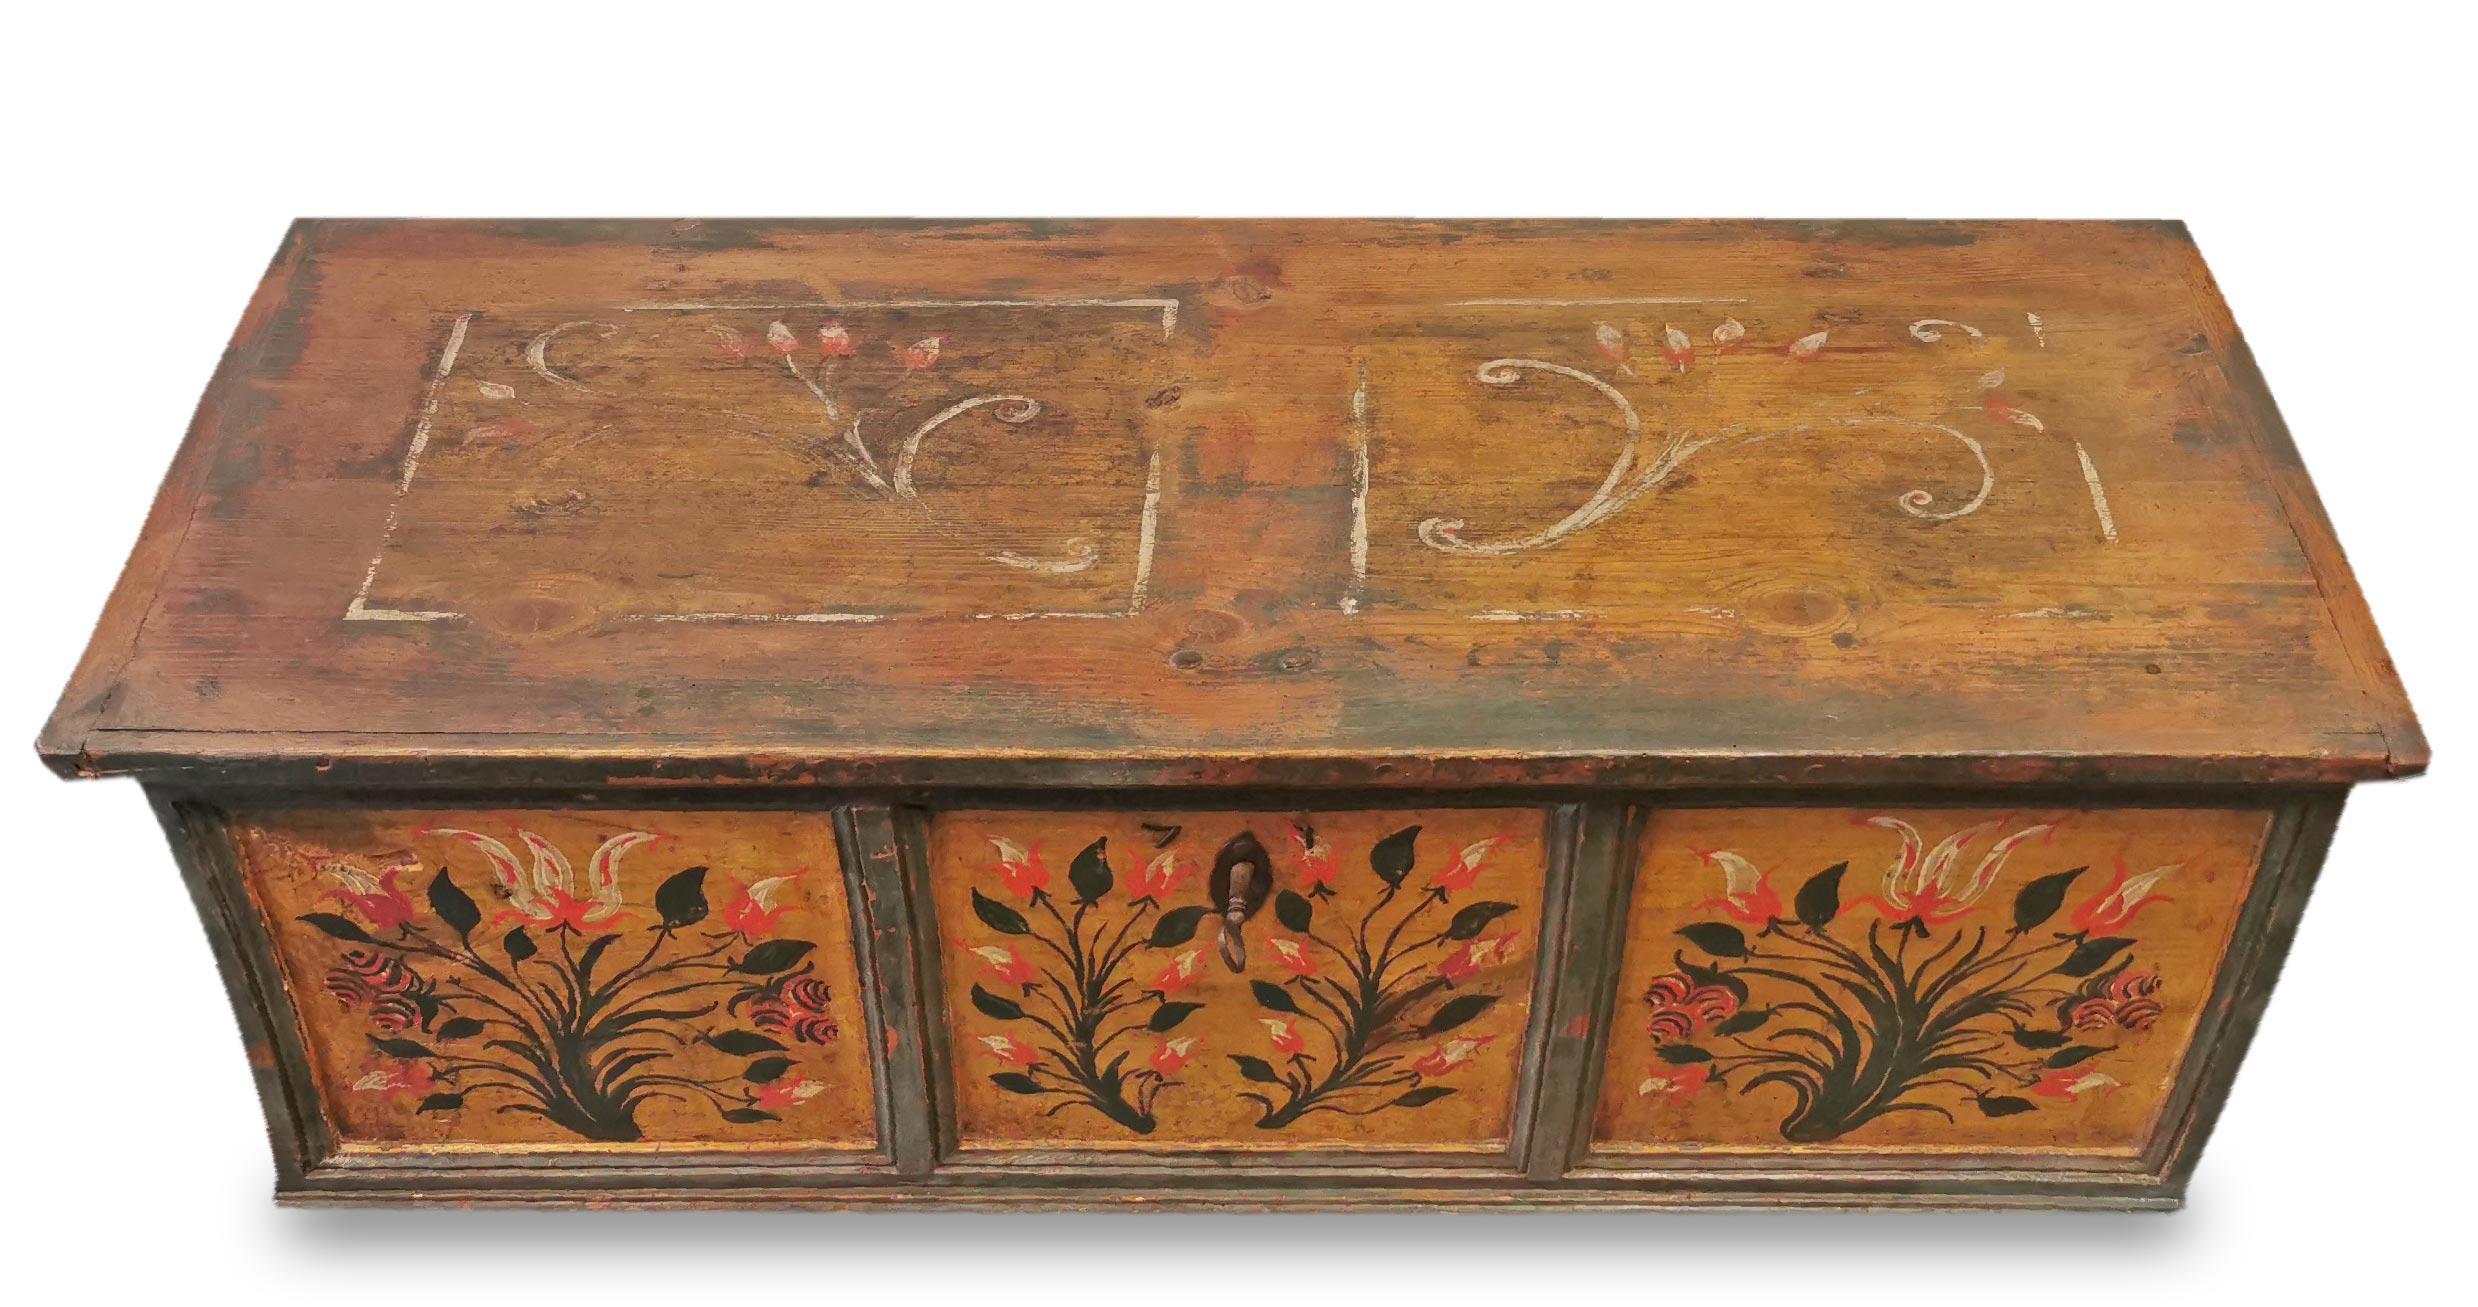 Dark Green Floral Painted Blanket Chest Early 19th Century 5